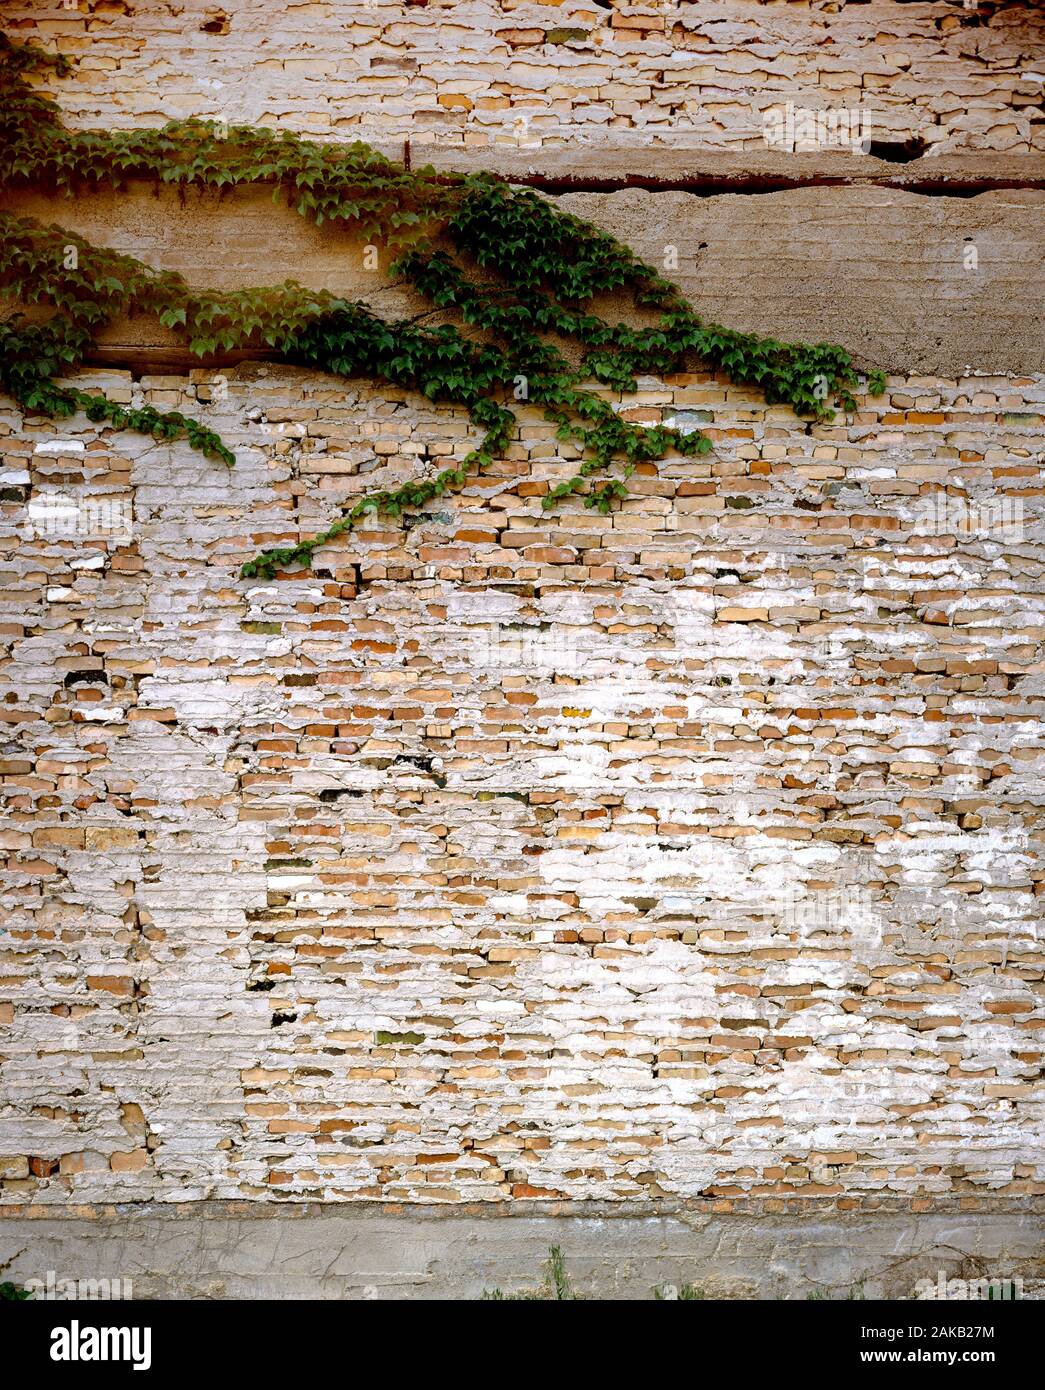 View of old weathered brick wall with green creeper plant Stock Photo